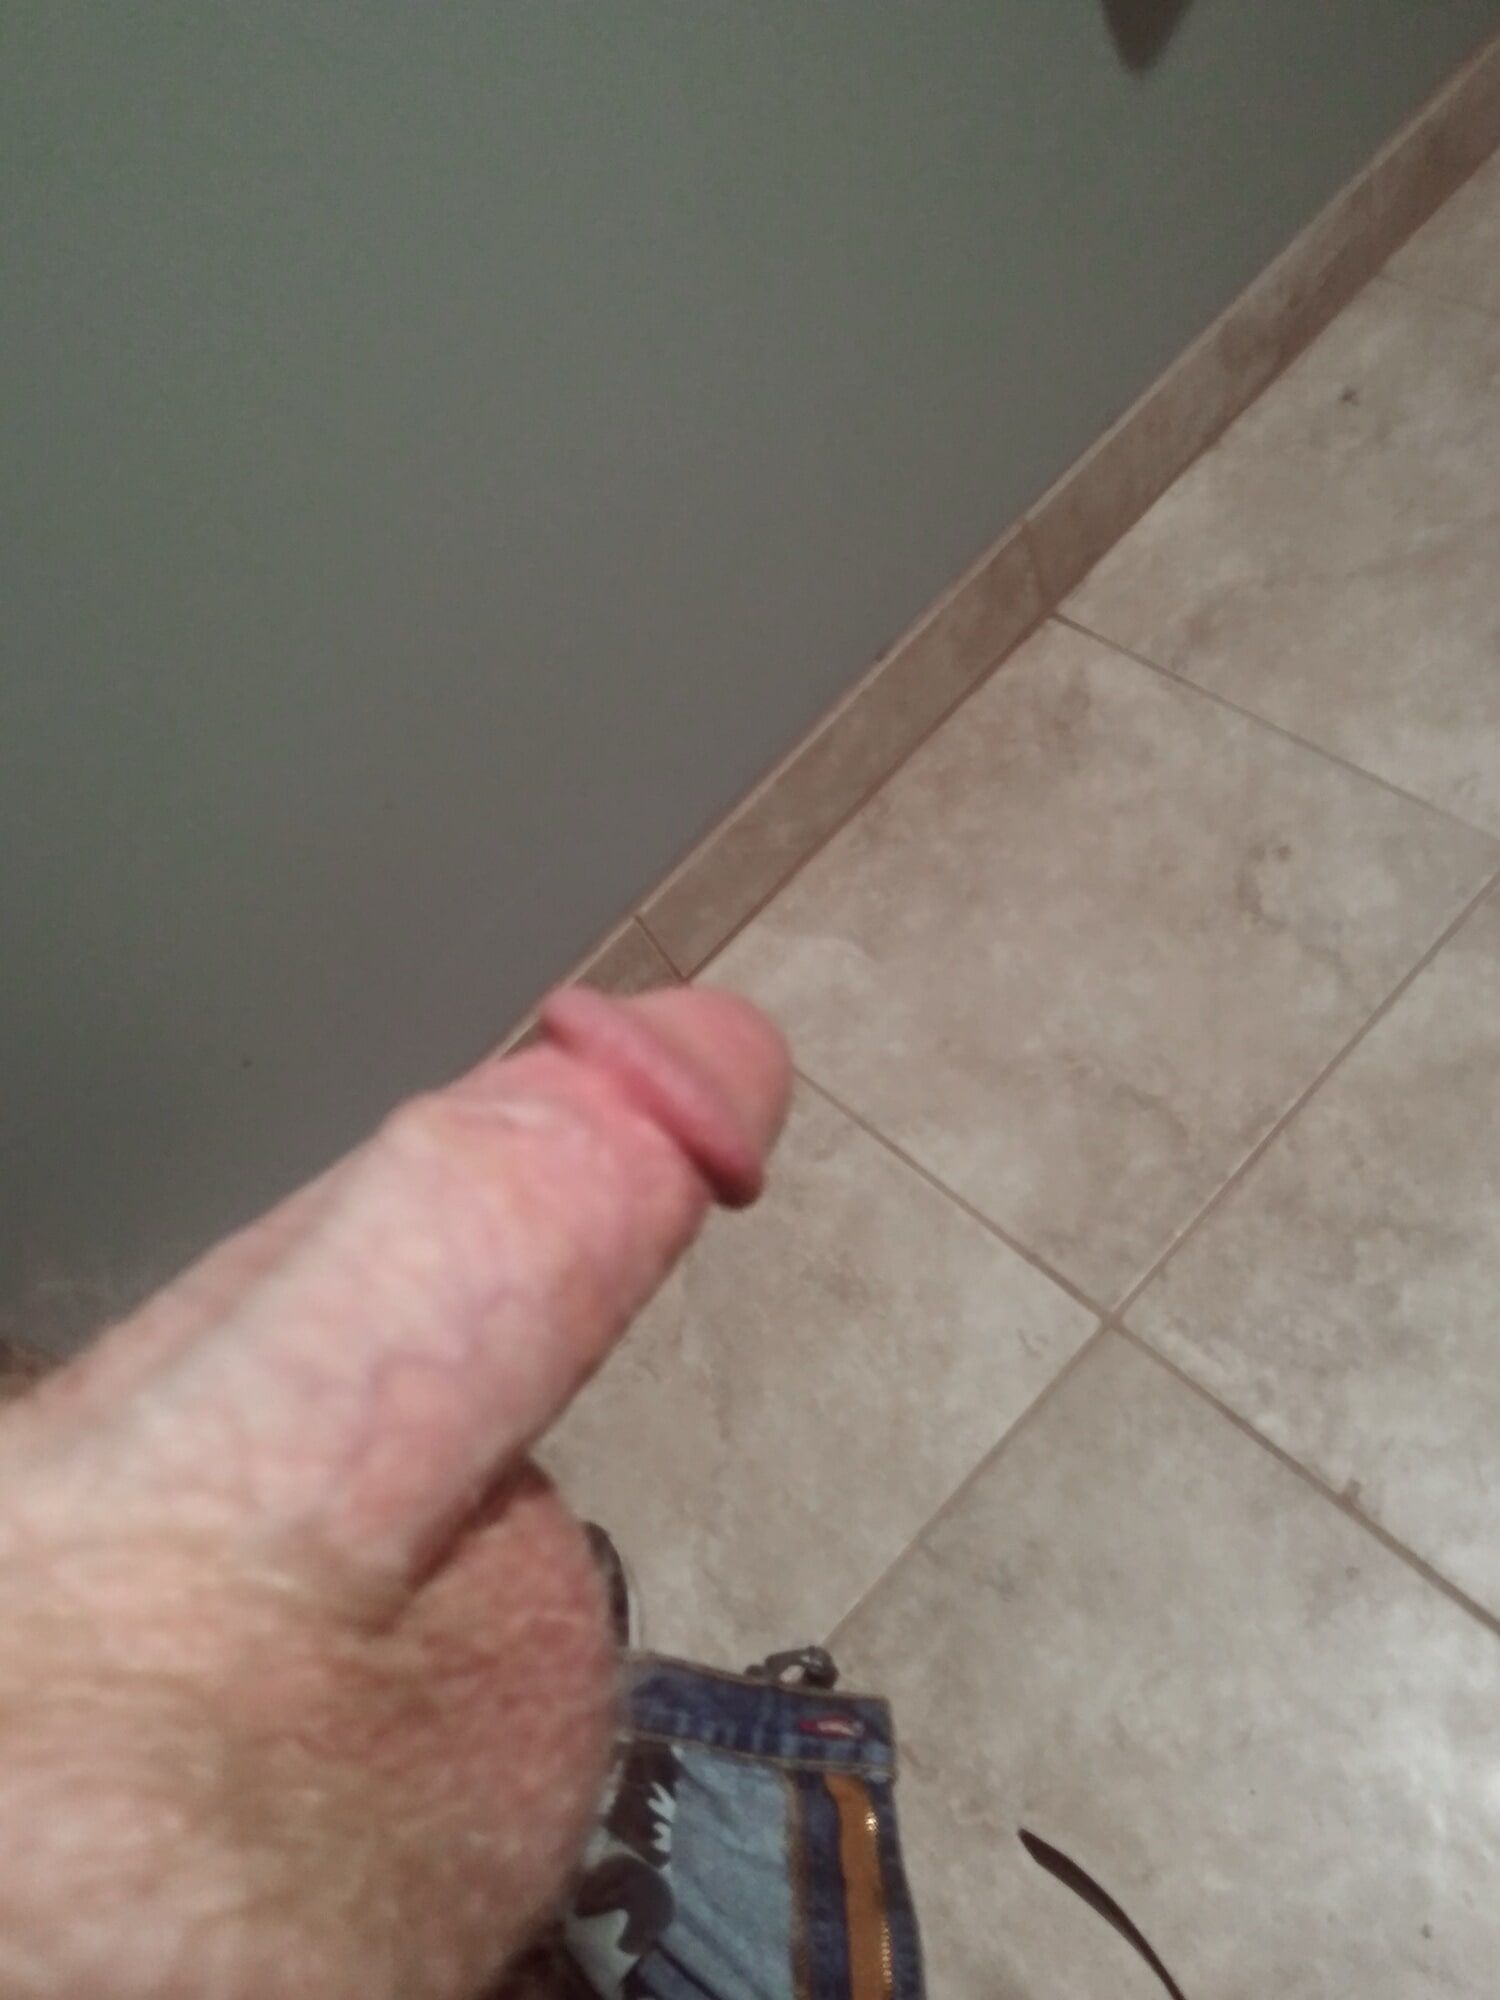 My cock waiting for someone to play with it #2